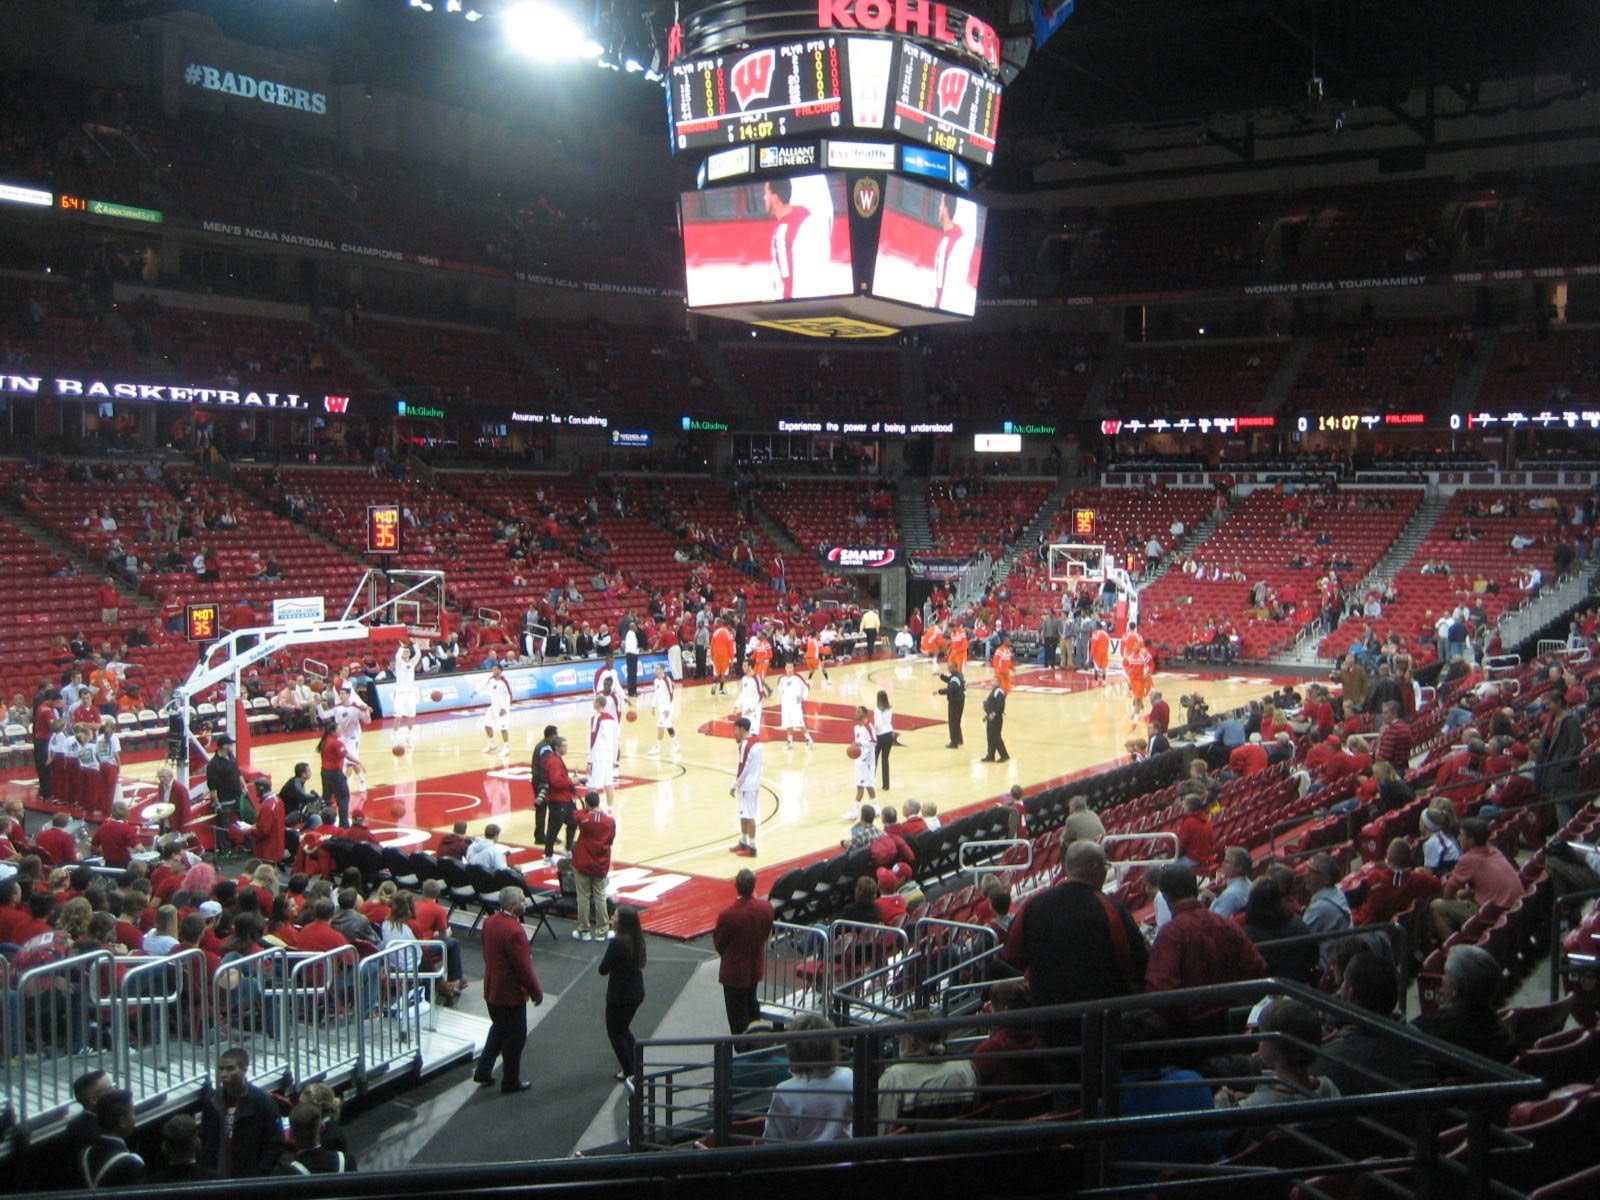 section 112, row n seat view  - kohl center